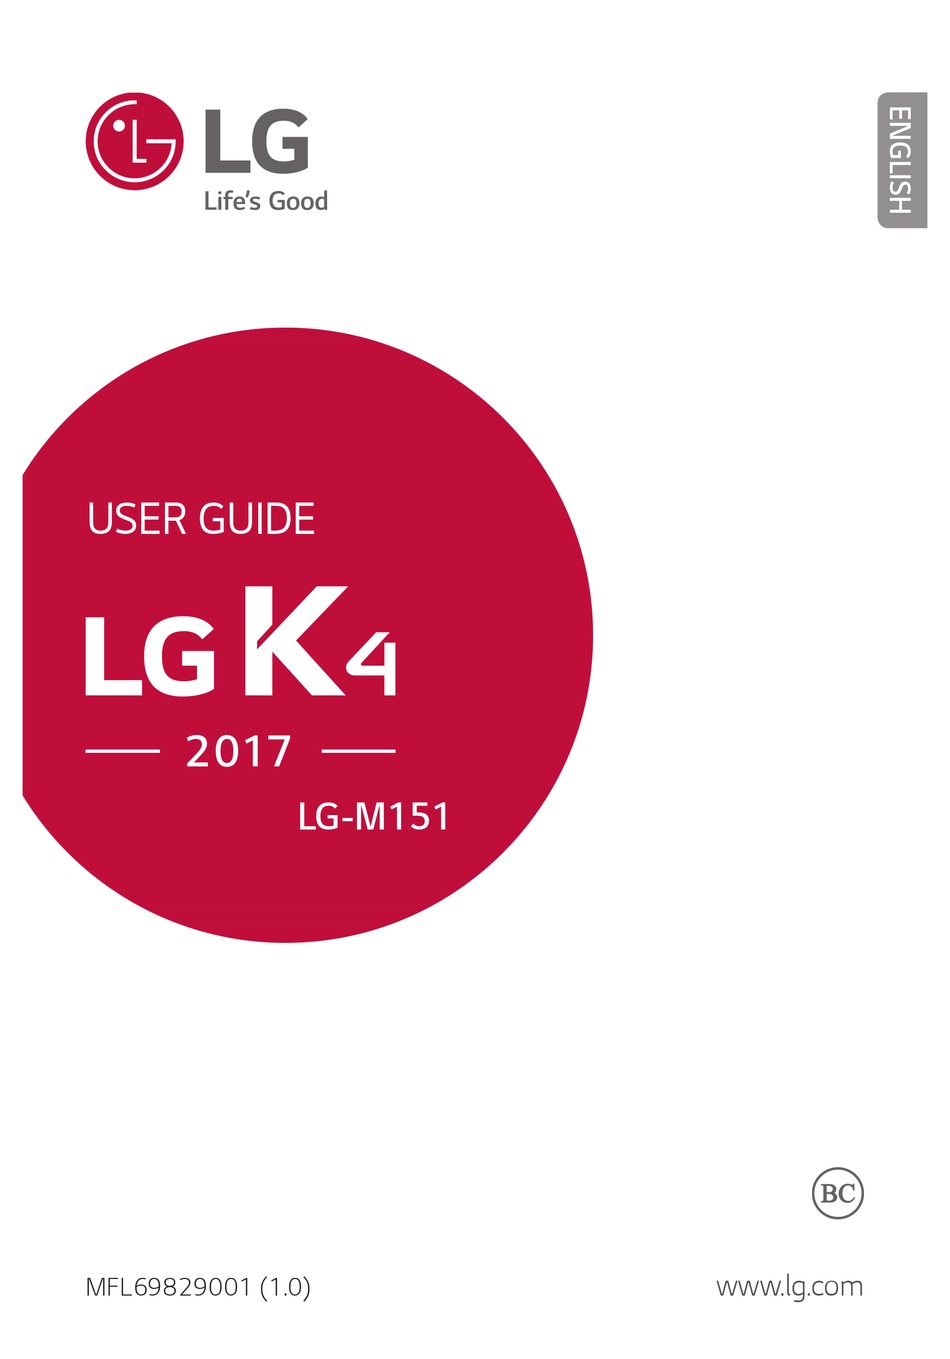 lg k4 display for mac technical support